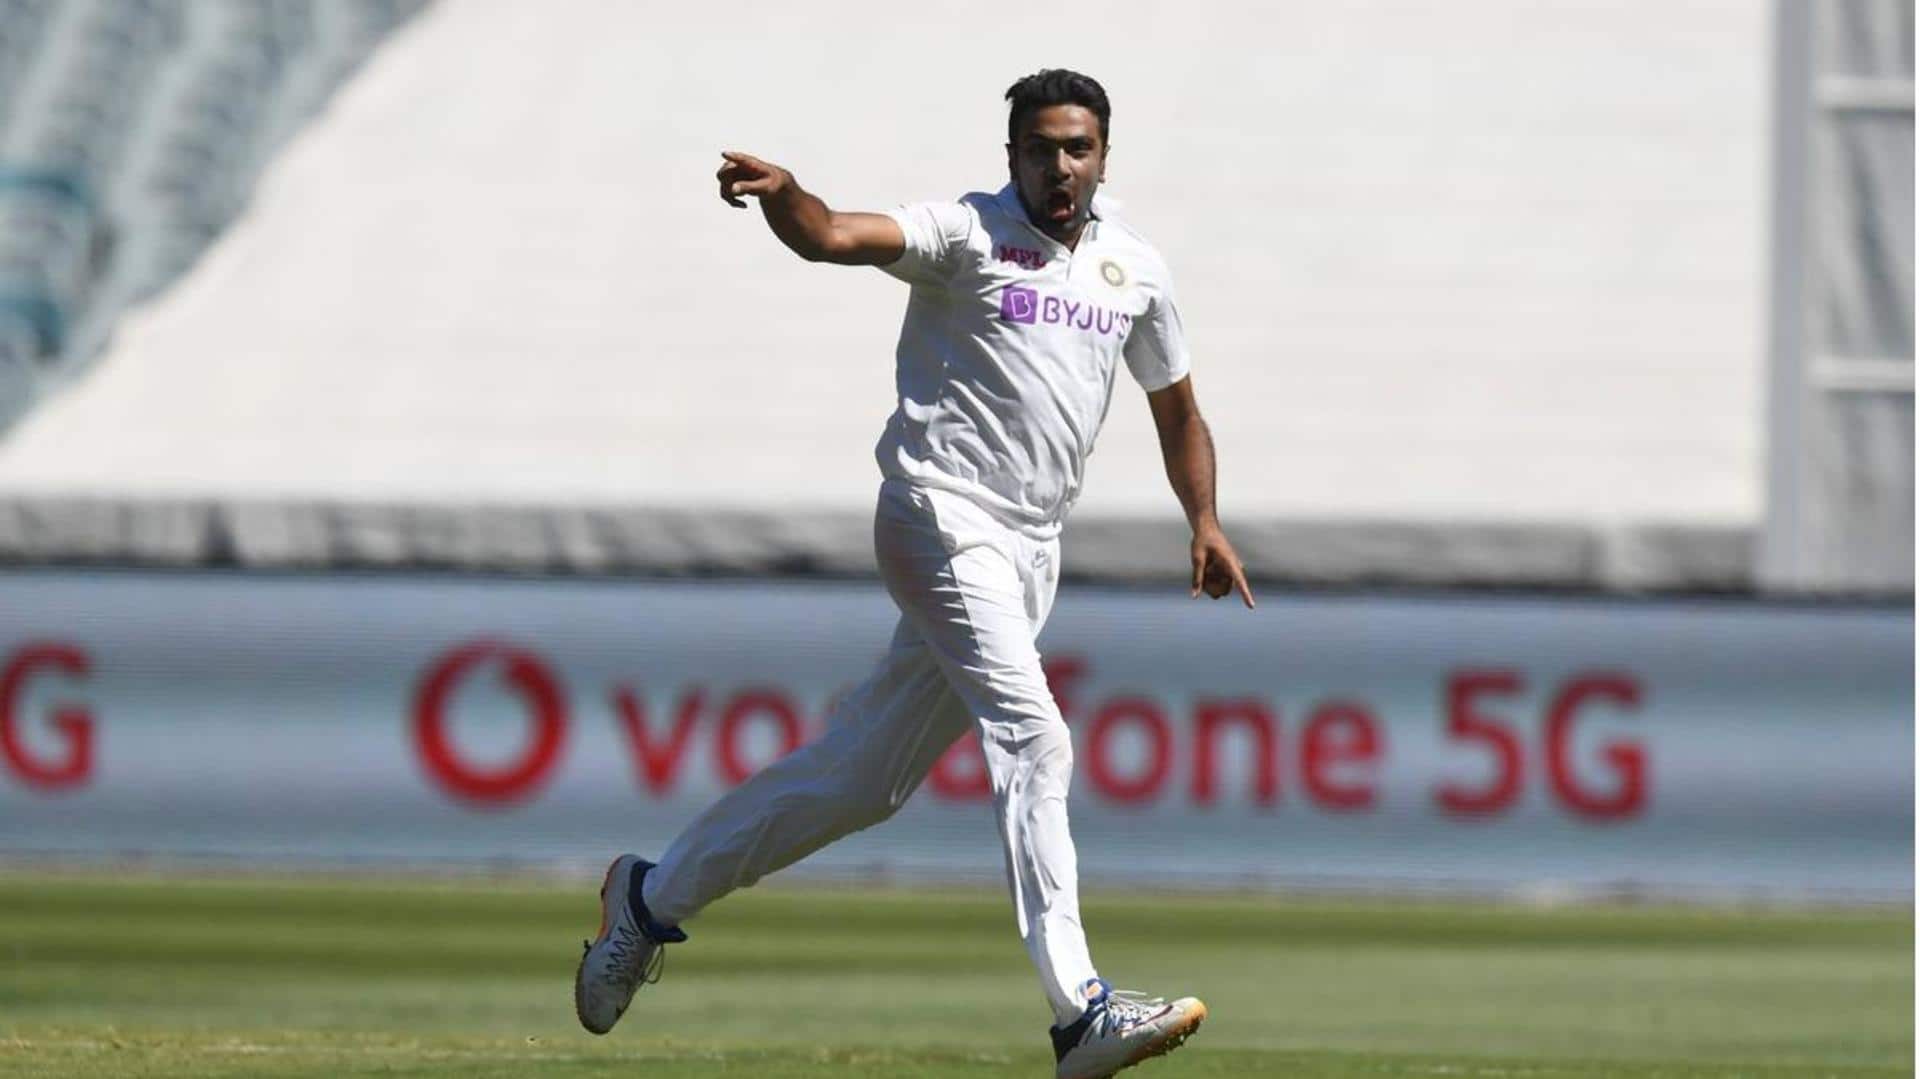 Ashwin displaces Kumble as India's second-highest wicket-taker against WI (Tests)